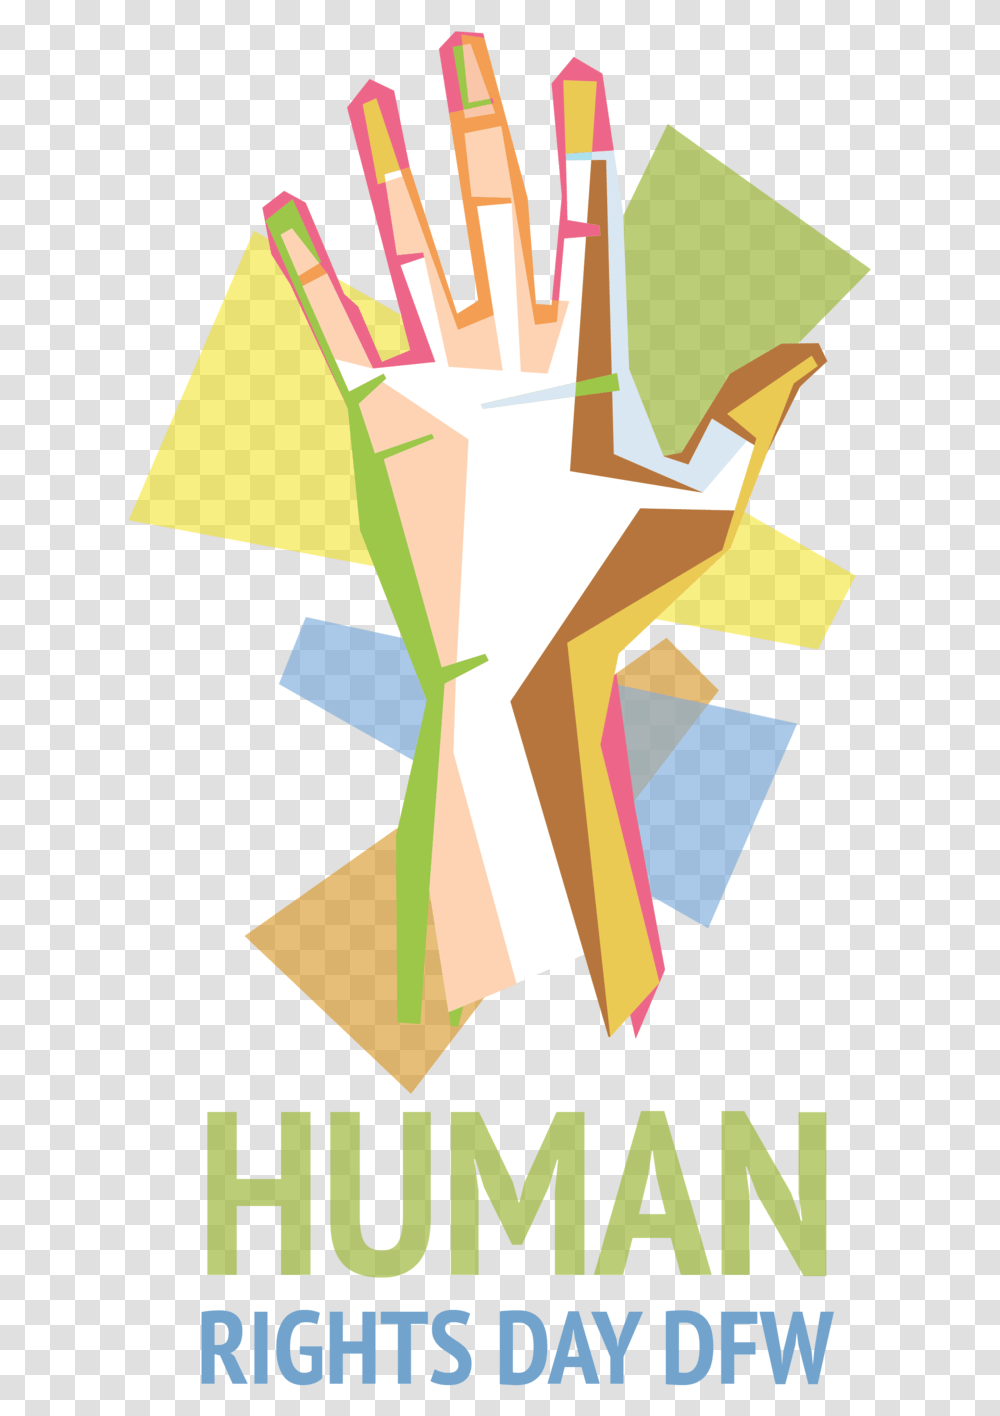 Human Rights Day Hands Up Illustration Human Rights, Graphics, Art, Paper, Poster Transparent Png